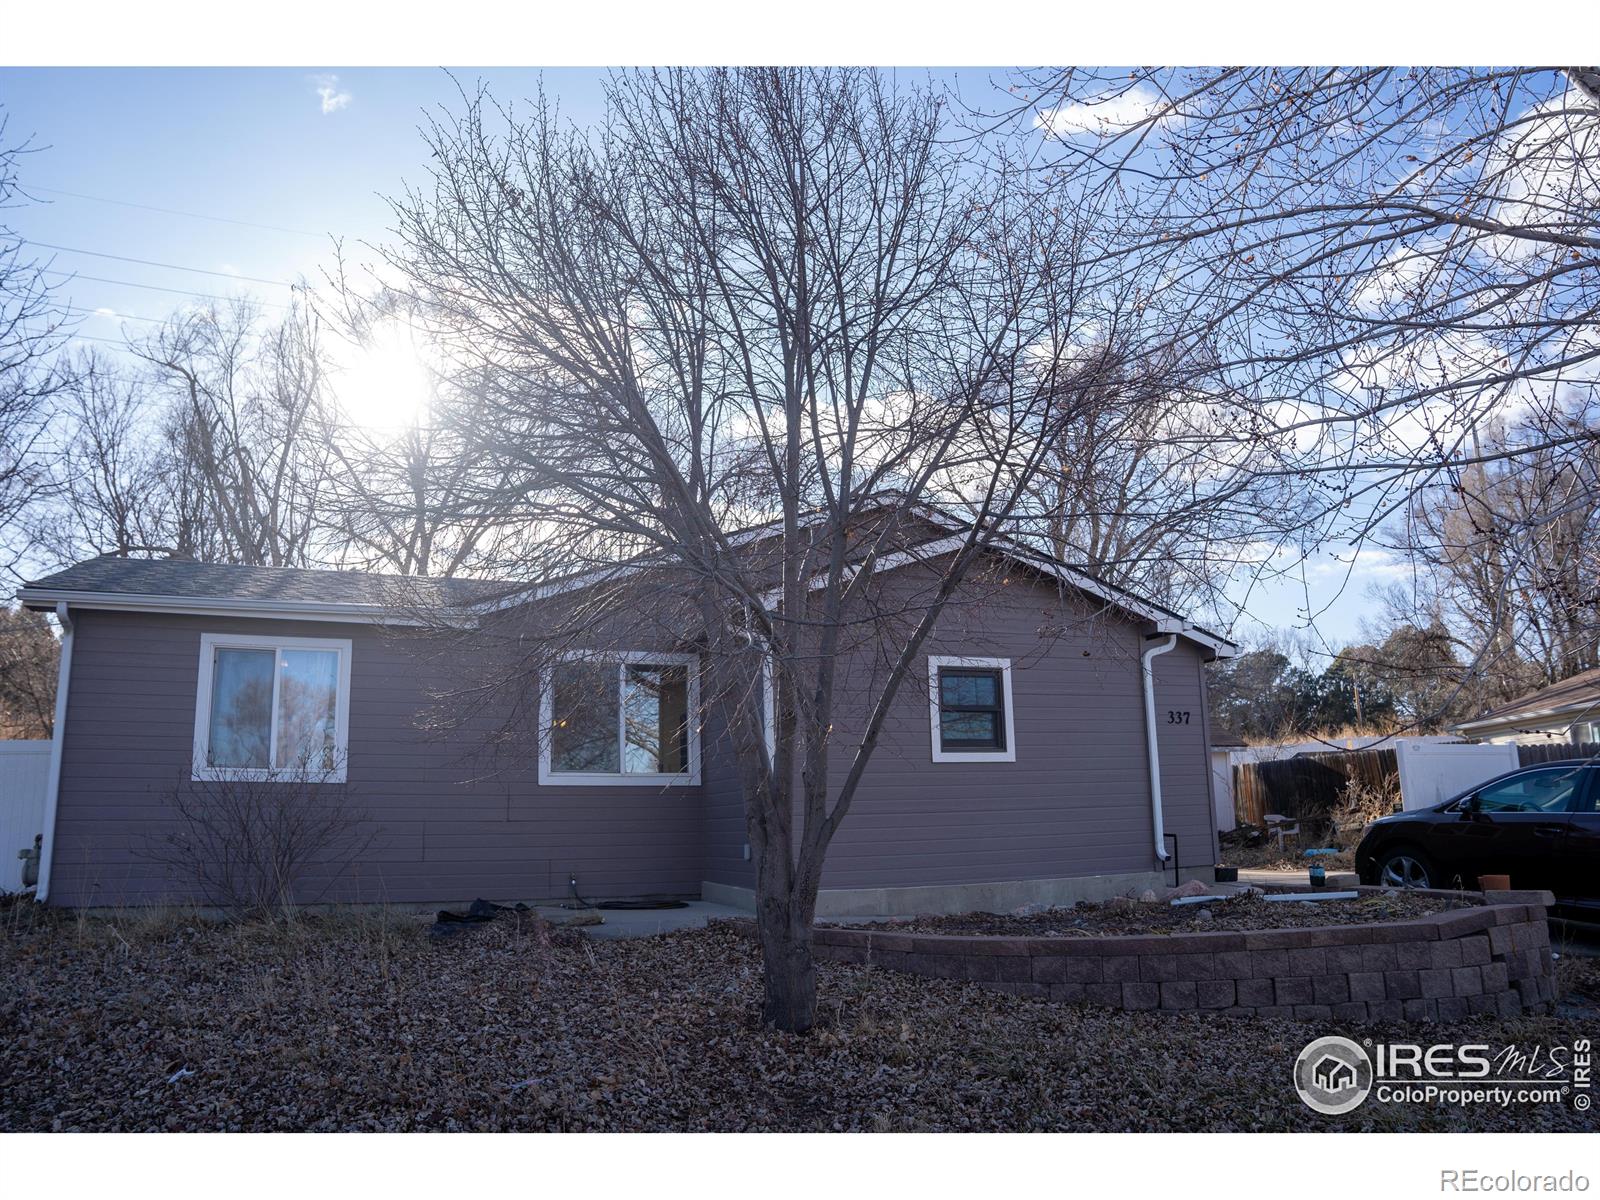 337  23rd Ave Ct, greeley MLS: 4567891001387 Beds: 4 Baths: 2 Price: $350,000